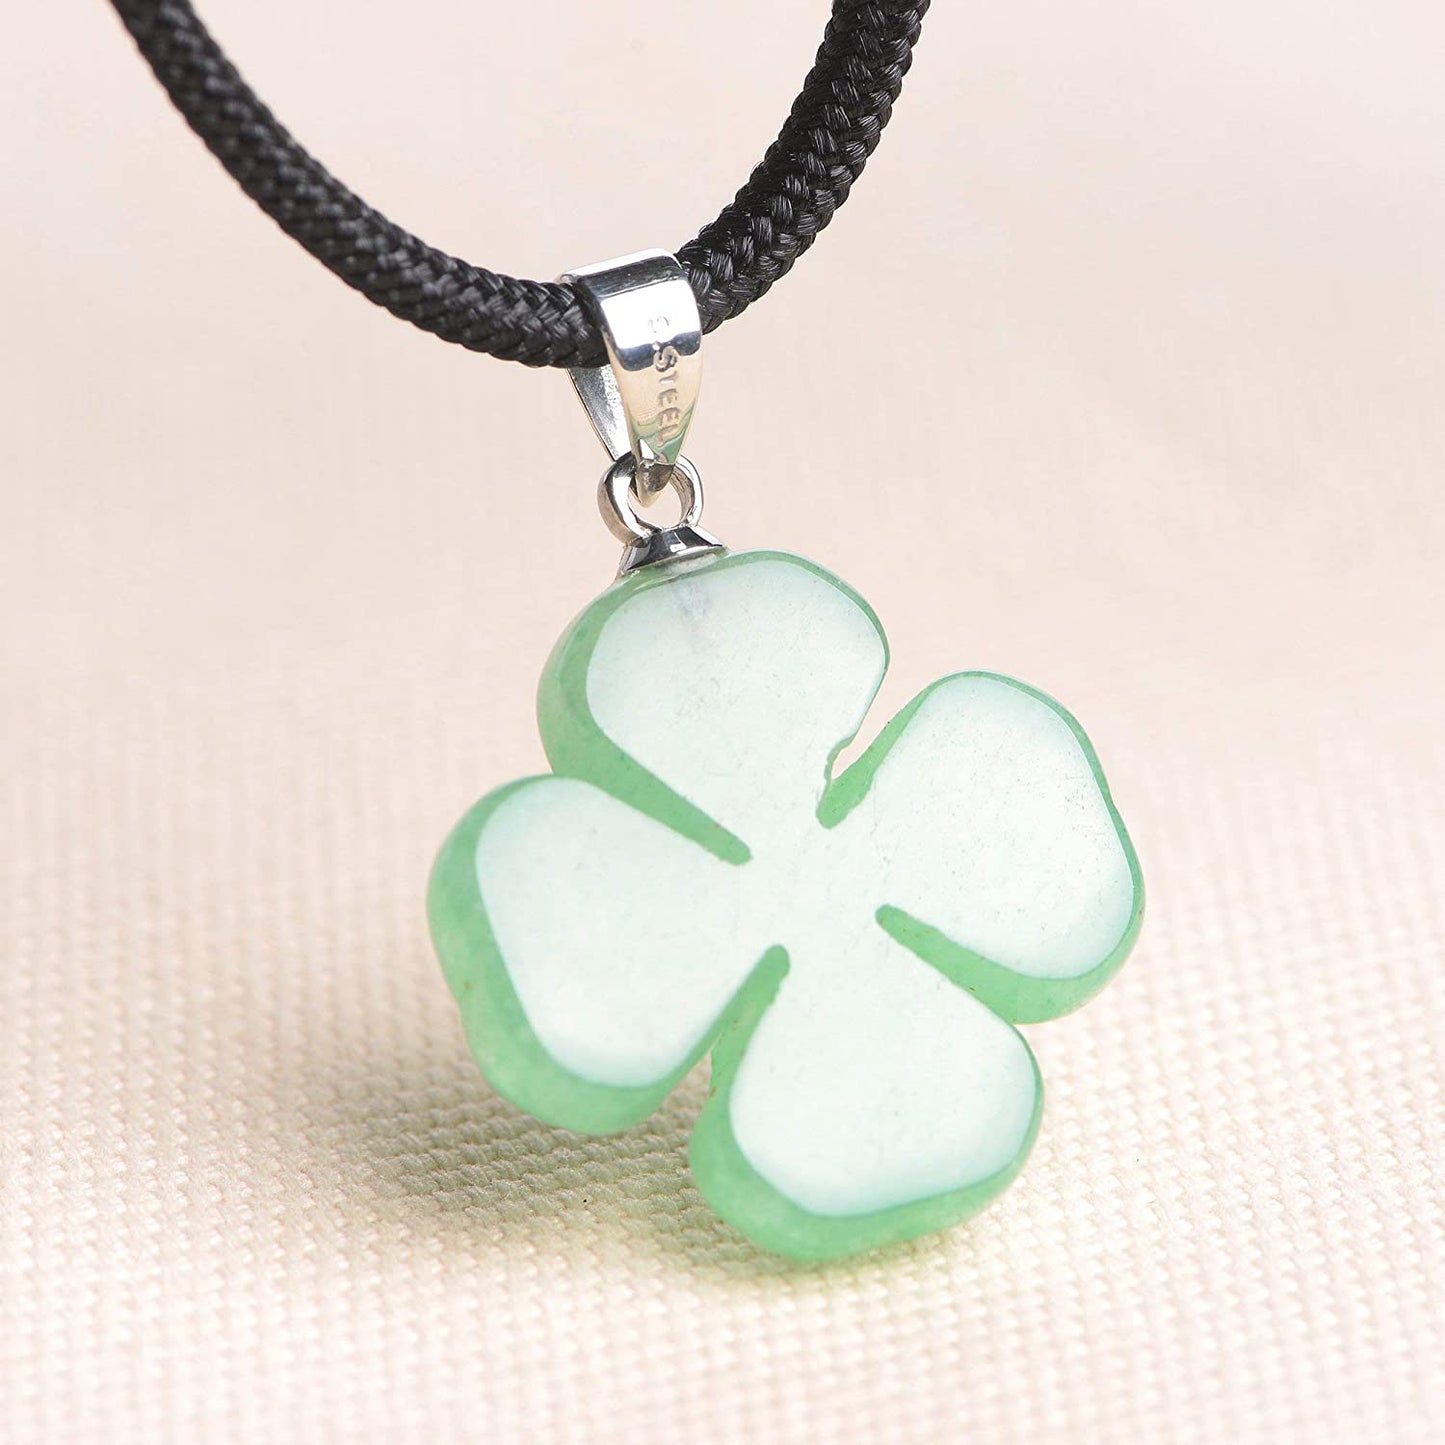 Four Leaf Clover Necklace,Made with Green Aventurine Jade for Faith Hope Love and Luck 16 Inch Rope Chain